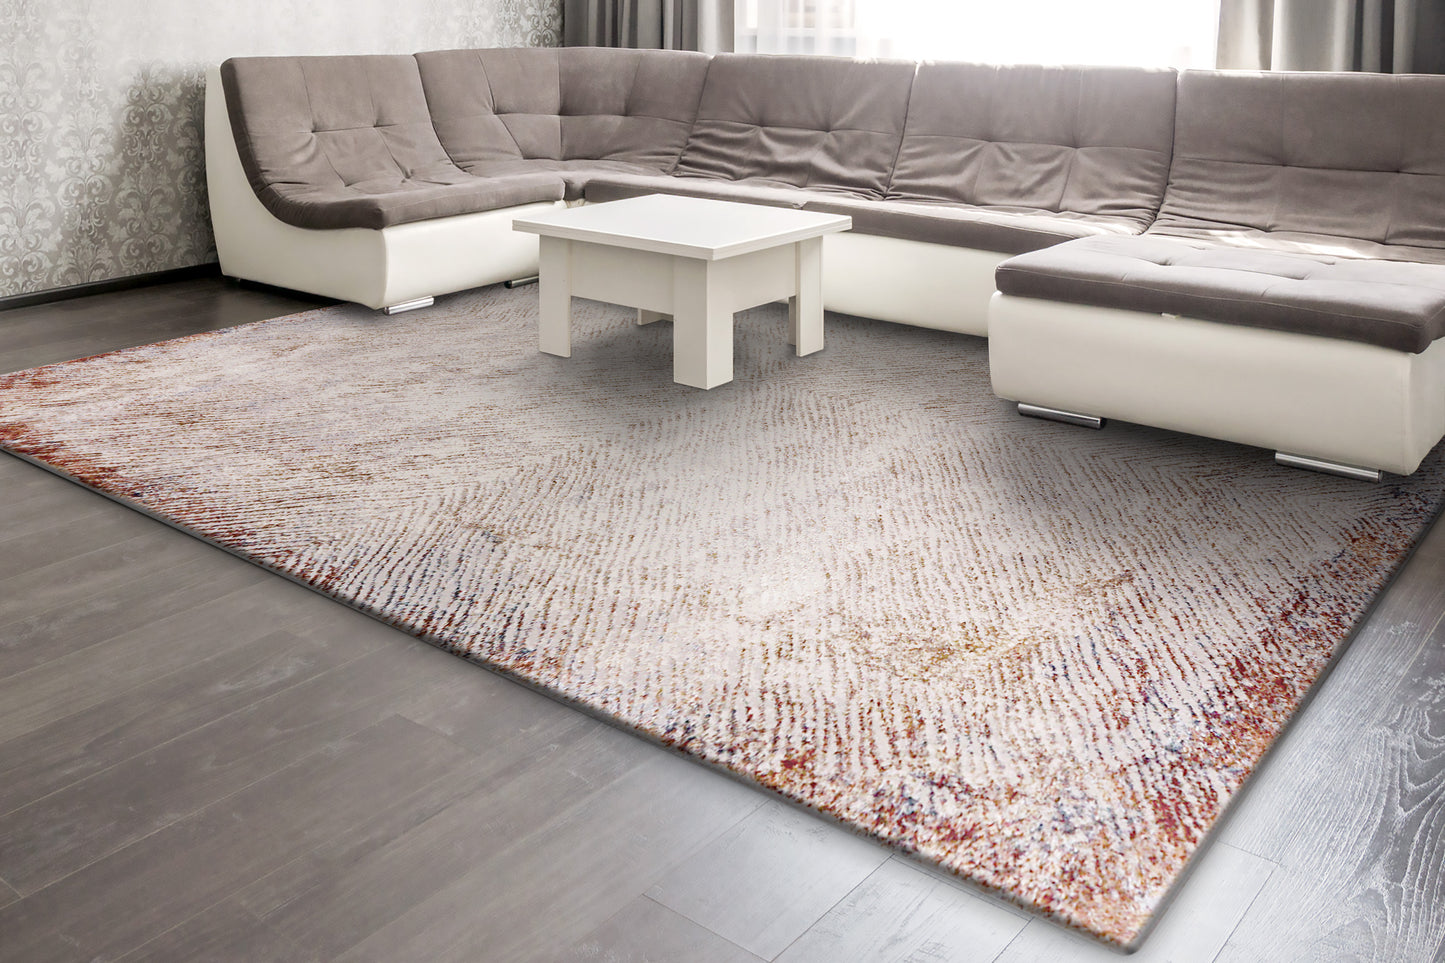 Obsession 9532-130 Cream/Red Area Rug